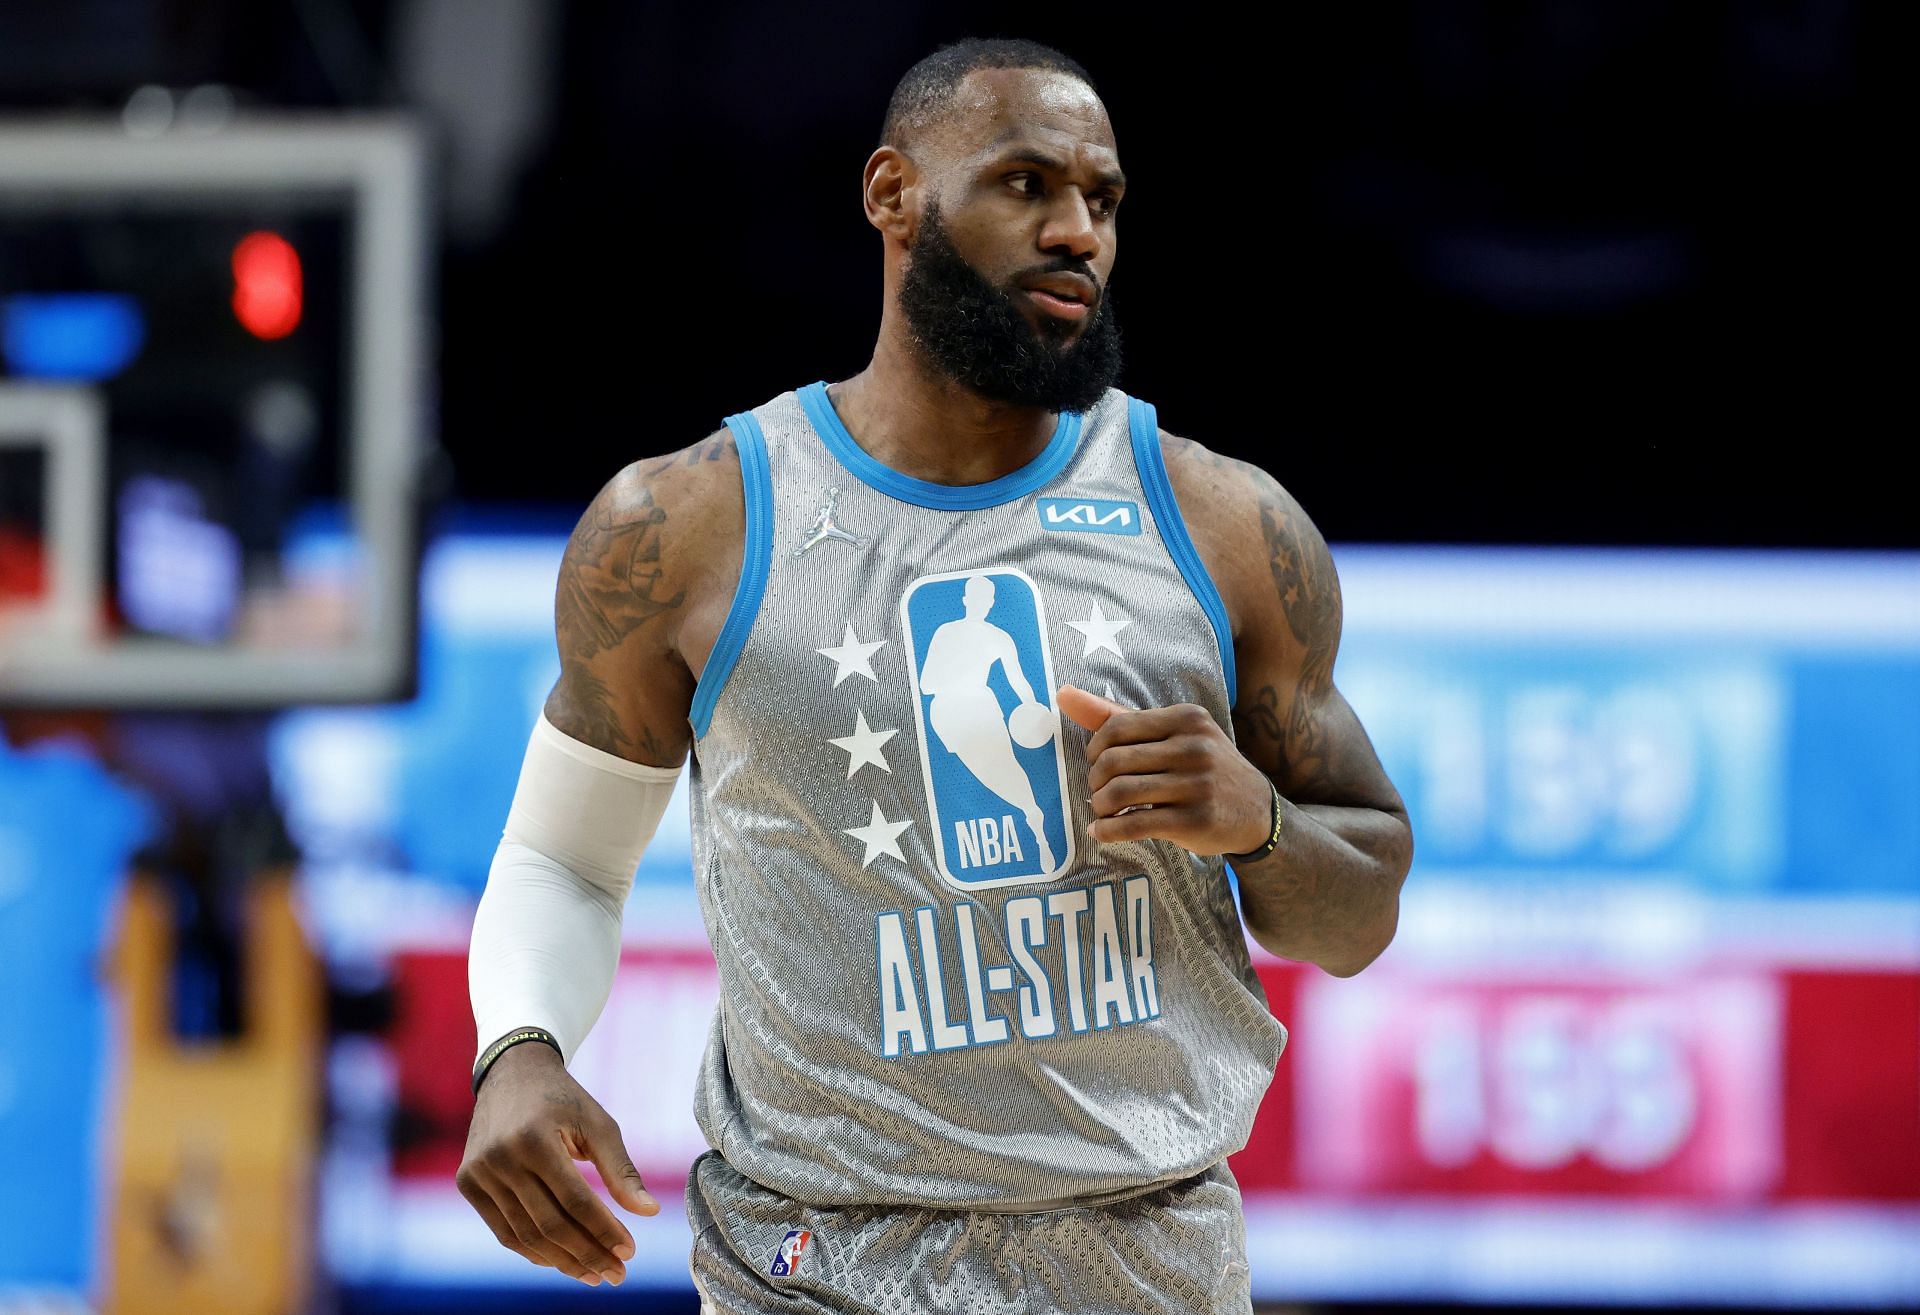 LeBron James at the 2022 NBA All-Star Game